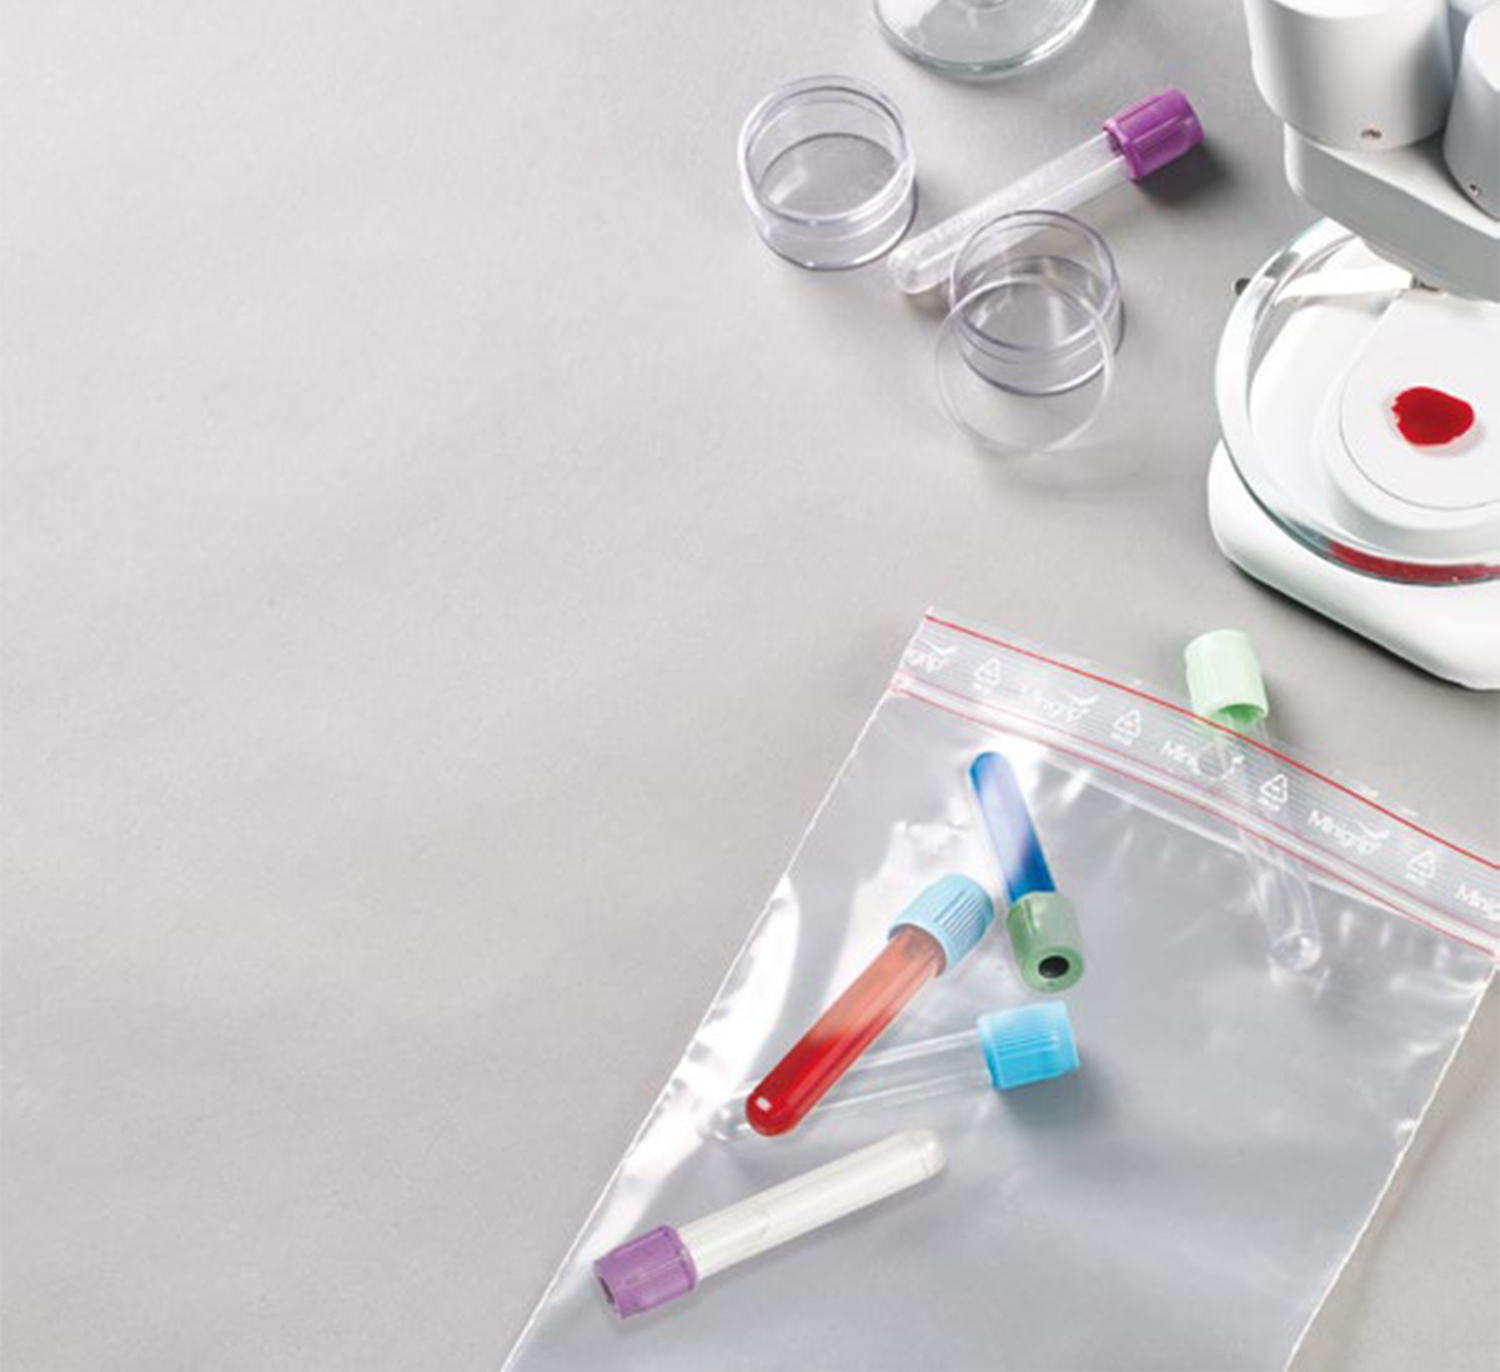 Packaging solutions tailored to your medical lab or hospital